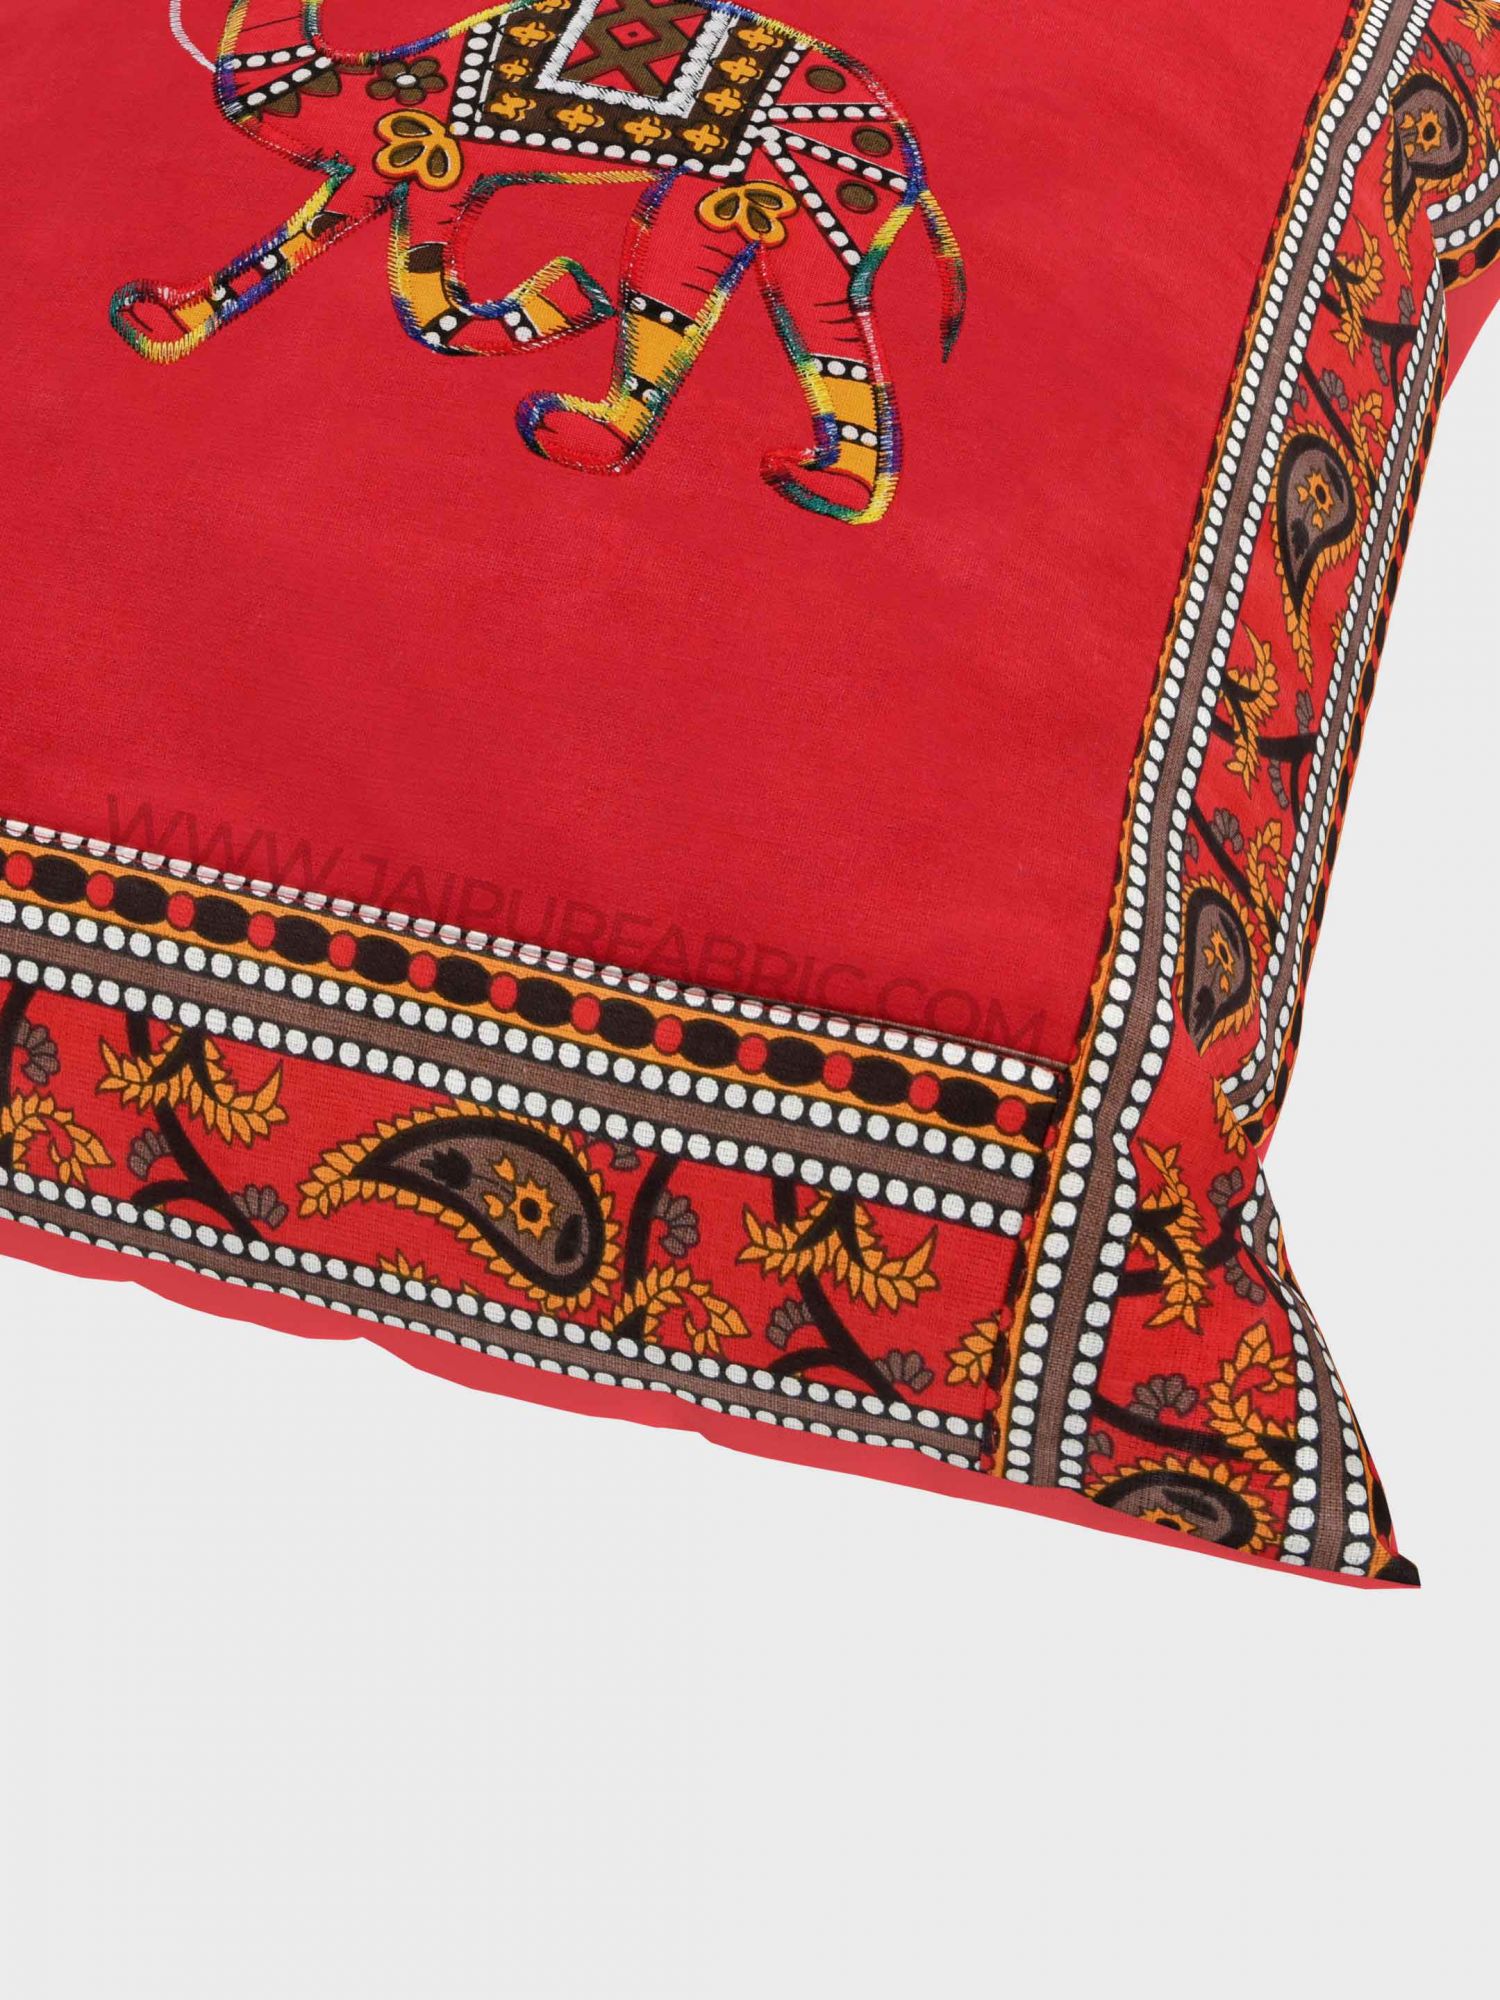 Applique Red Camel Jaipuri Hand Made Embroidery Patch Work Cushion Cover